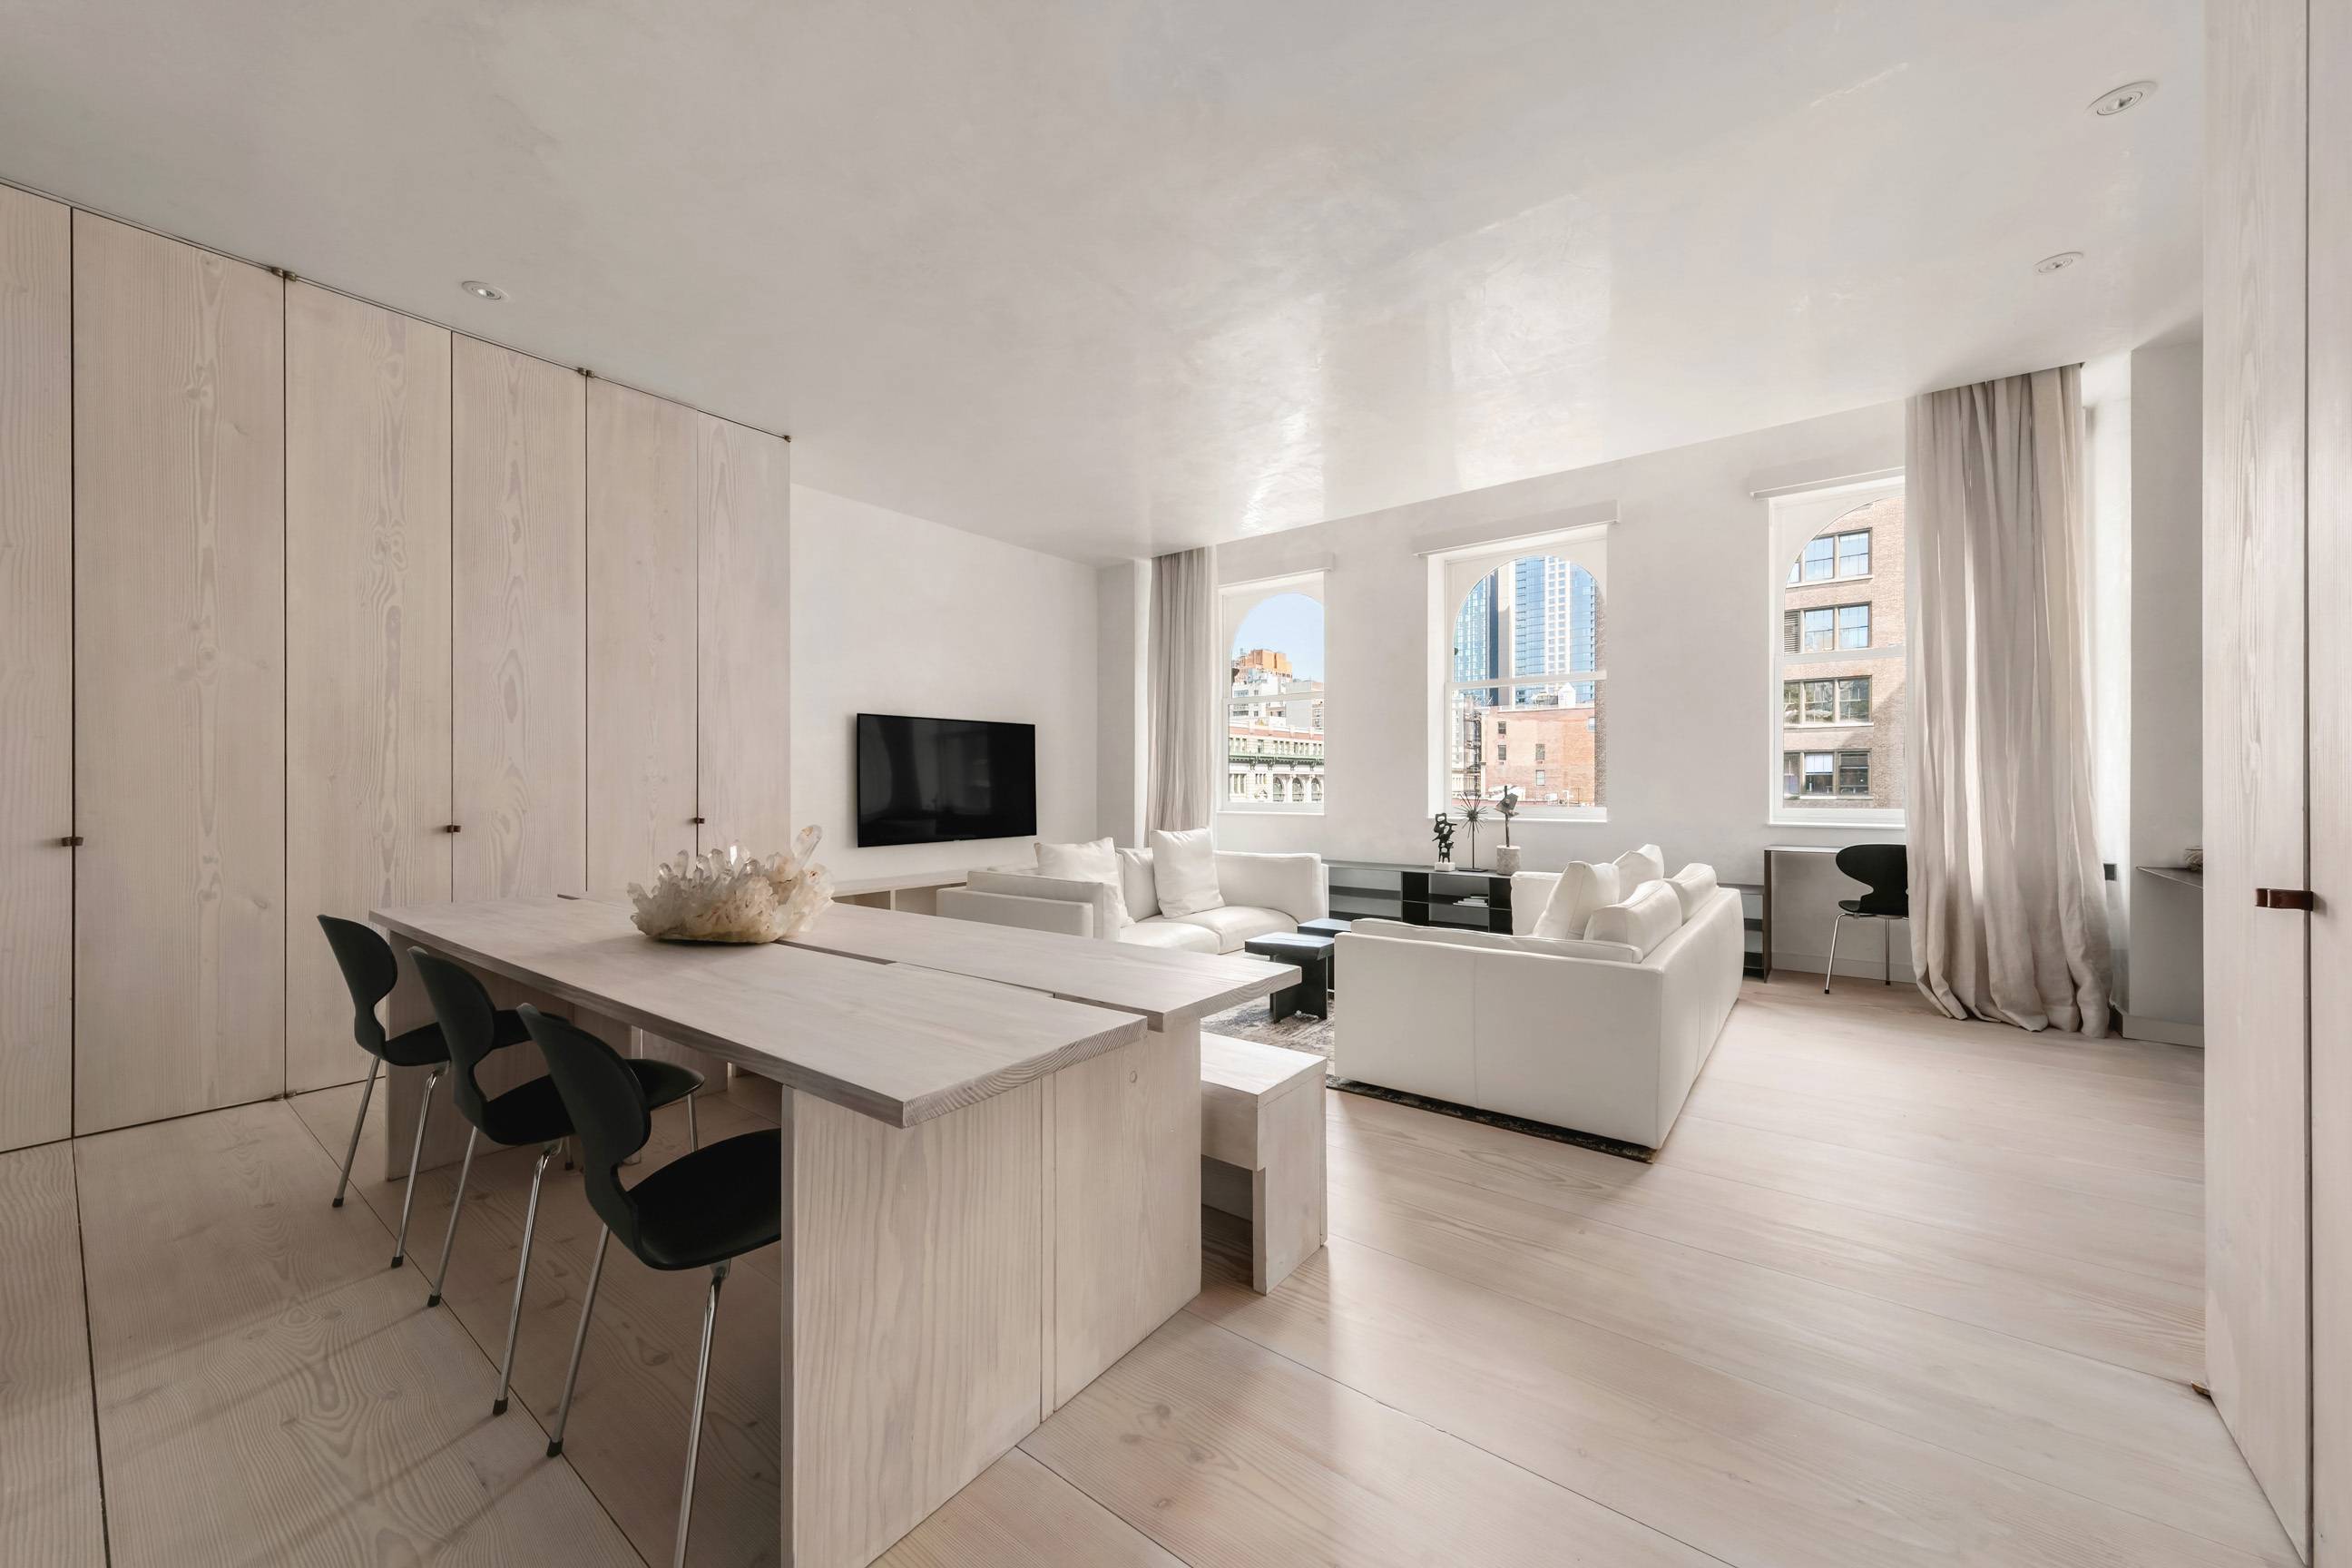 Nestled within the heart of the flatiron district just steps away from iconic NYC landmarks such as the Flatiron building and Madison Square Park ; The Cammeyer, a 19th century ...